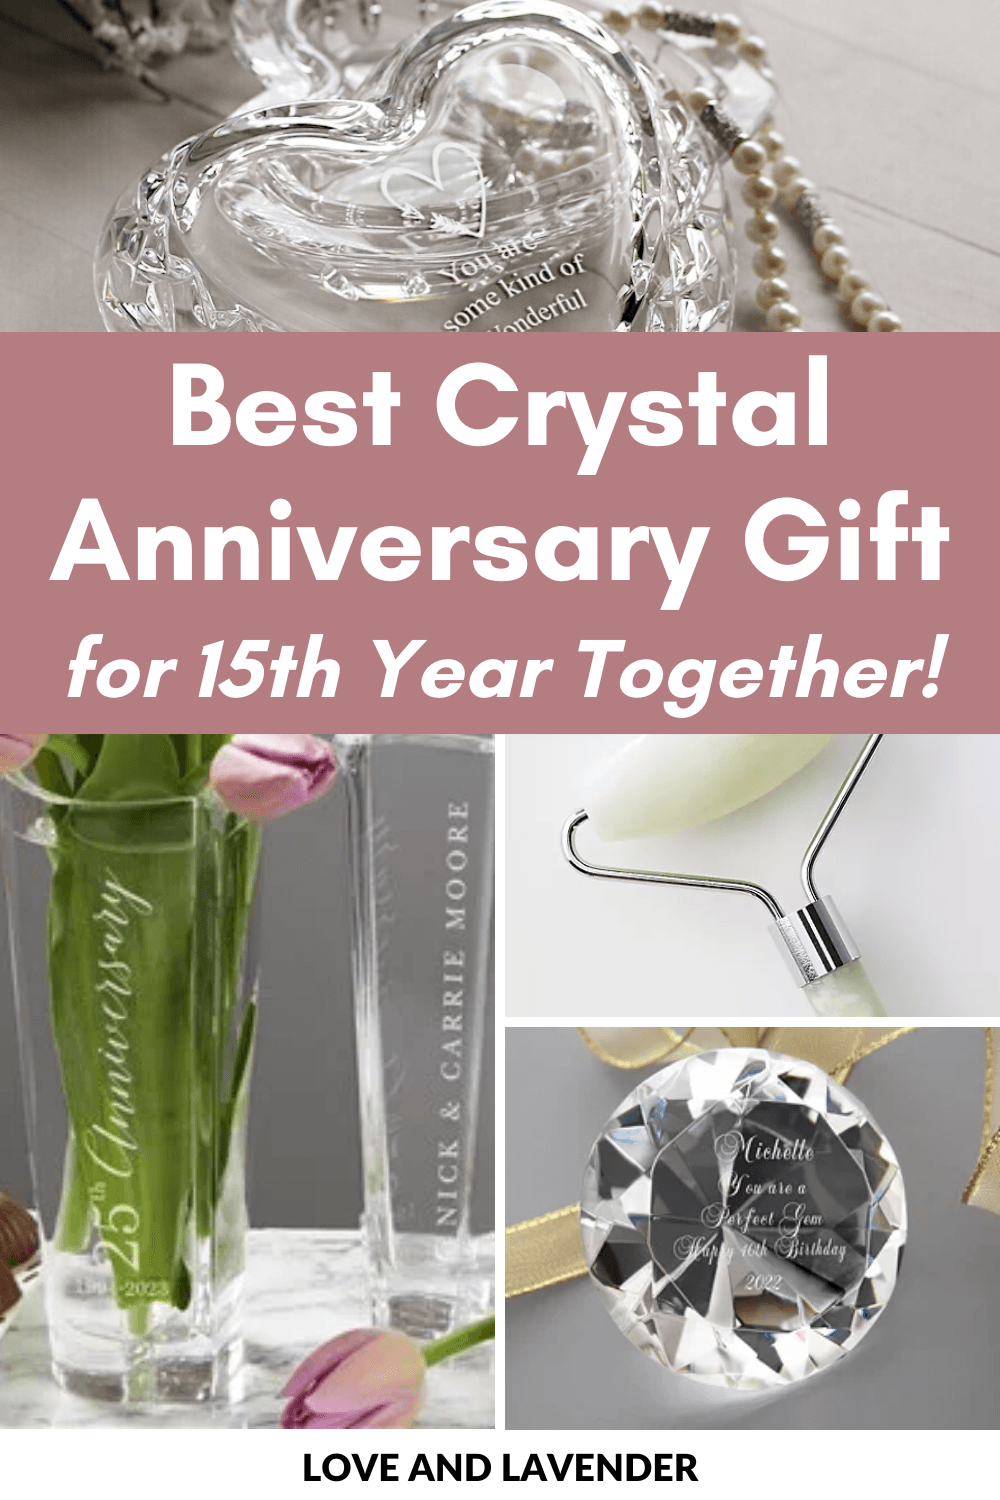 33 Crystal Gifts That Sparkle for a 15th Year Anniversary!